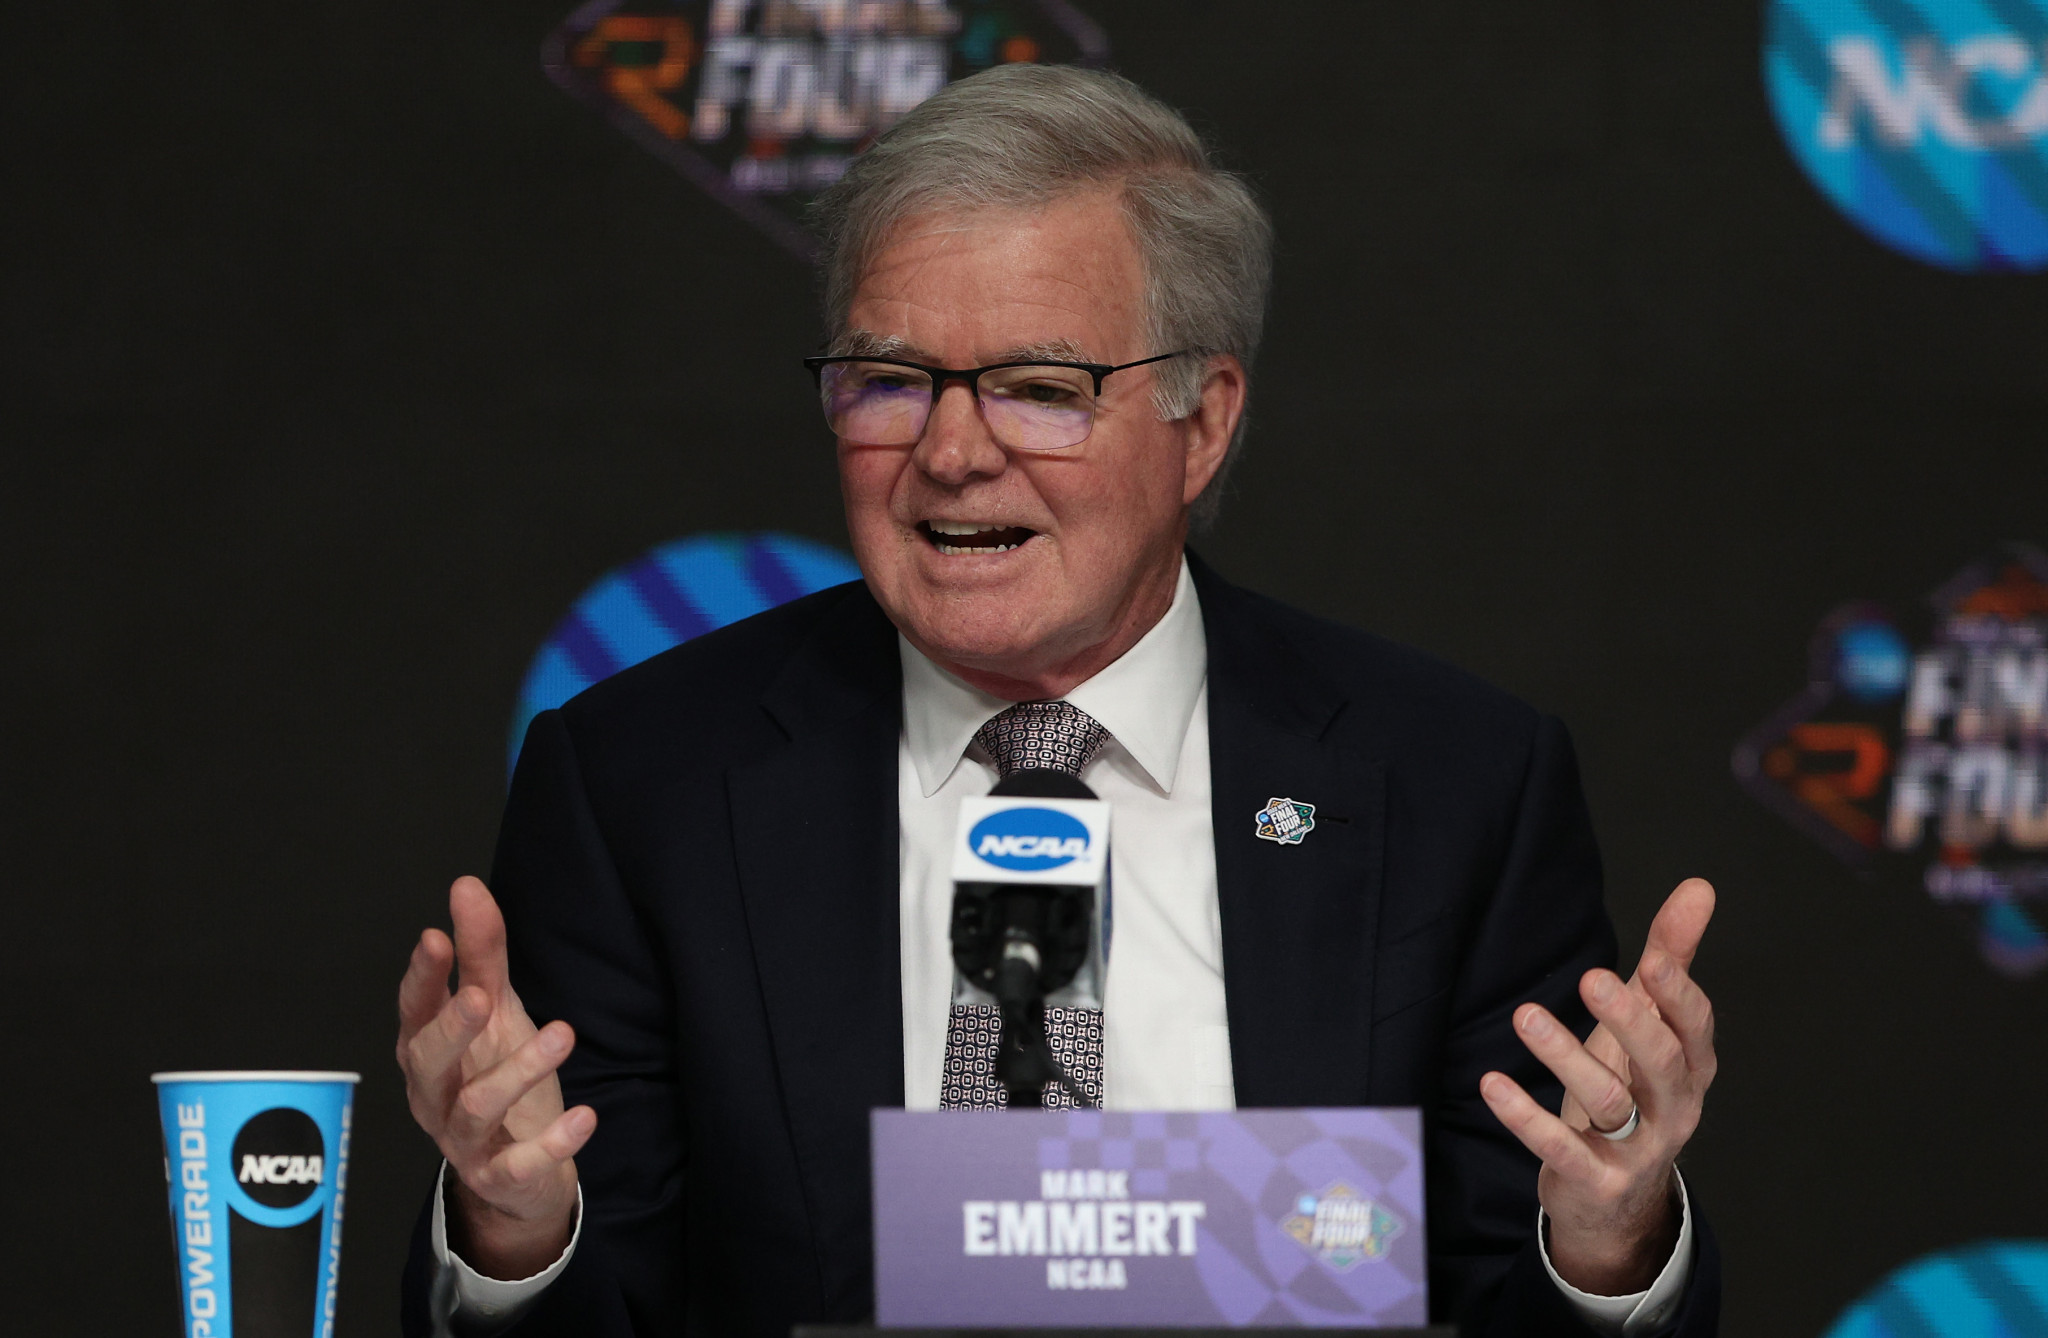 Mark Emmert has been criticised for being too conservative during his 12-year reign as NCAA President but has overseen one of the biggest changes in the history of the organisation ©Getty Images